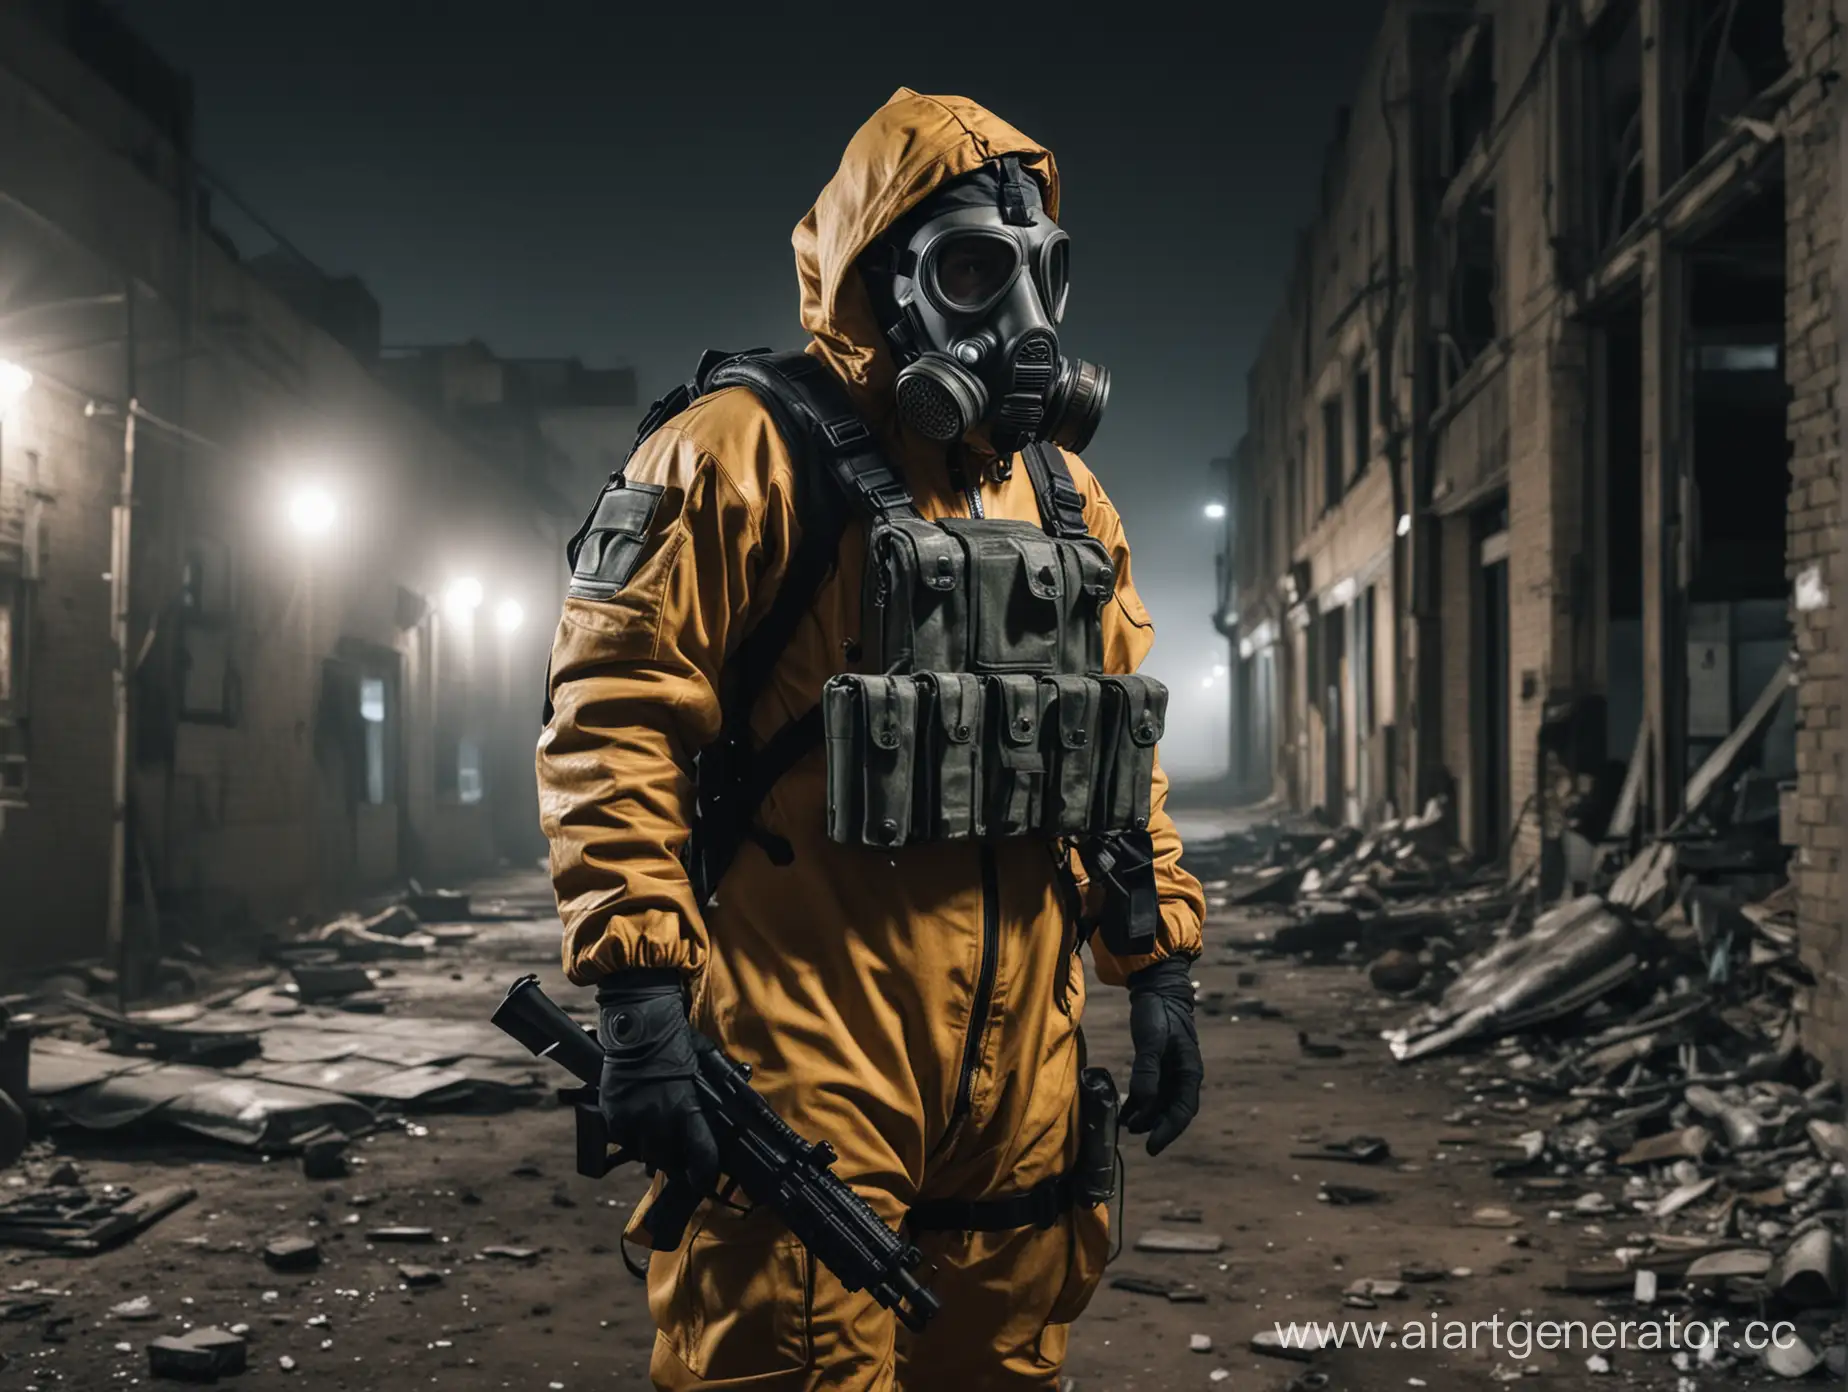 Survivor-in-Chemical-Suit-with-M4A1-in-Abandoned-Night-City